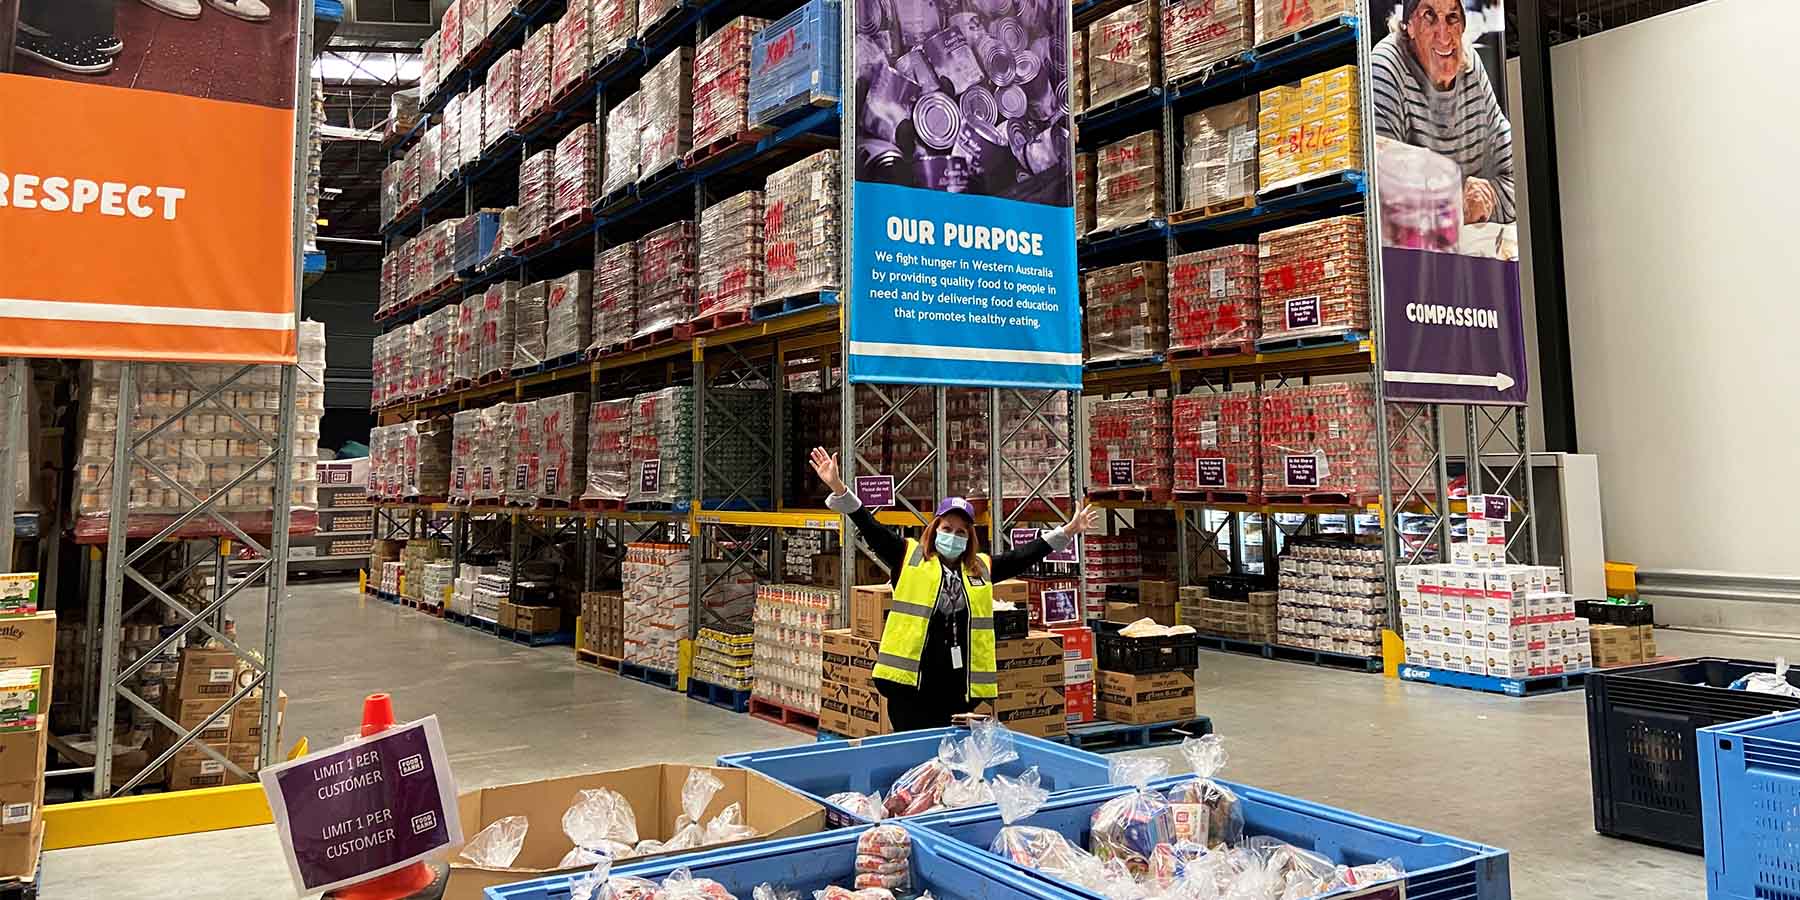 An image of foodbank's warehouse in Perth